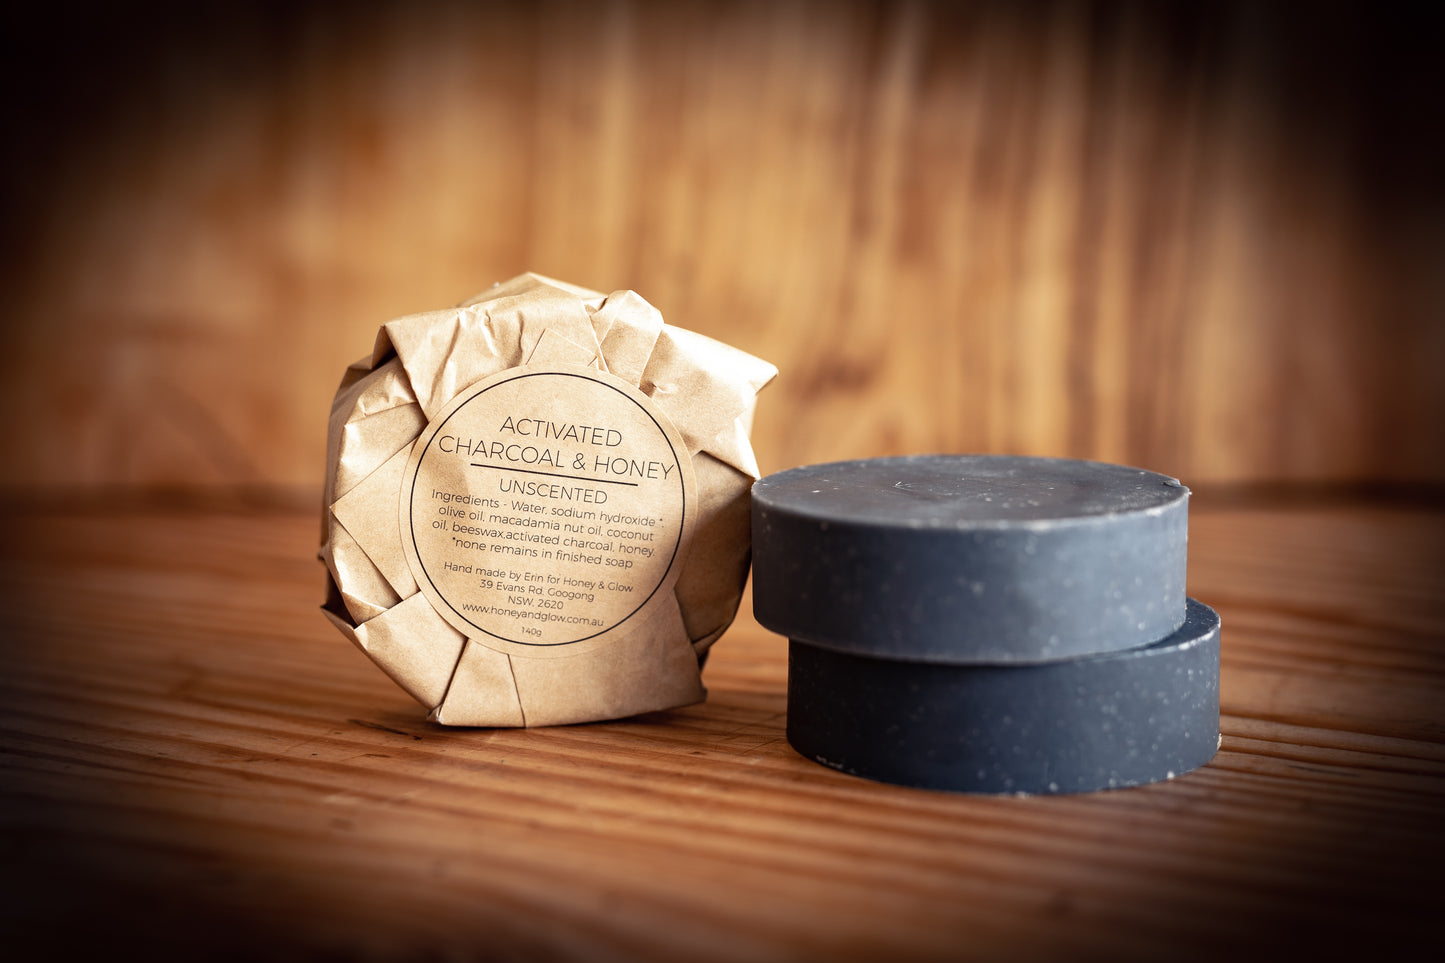 Activated Charcoal & Honey Handmade Soap